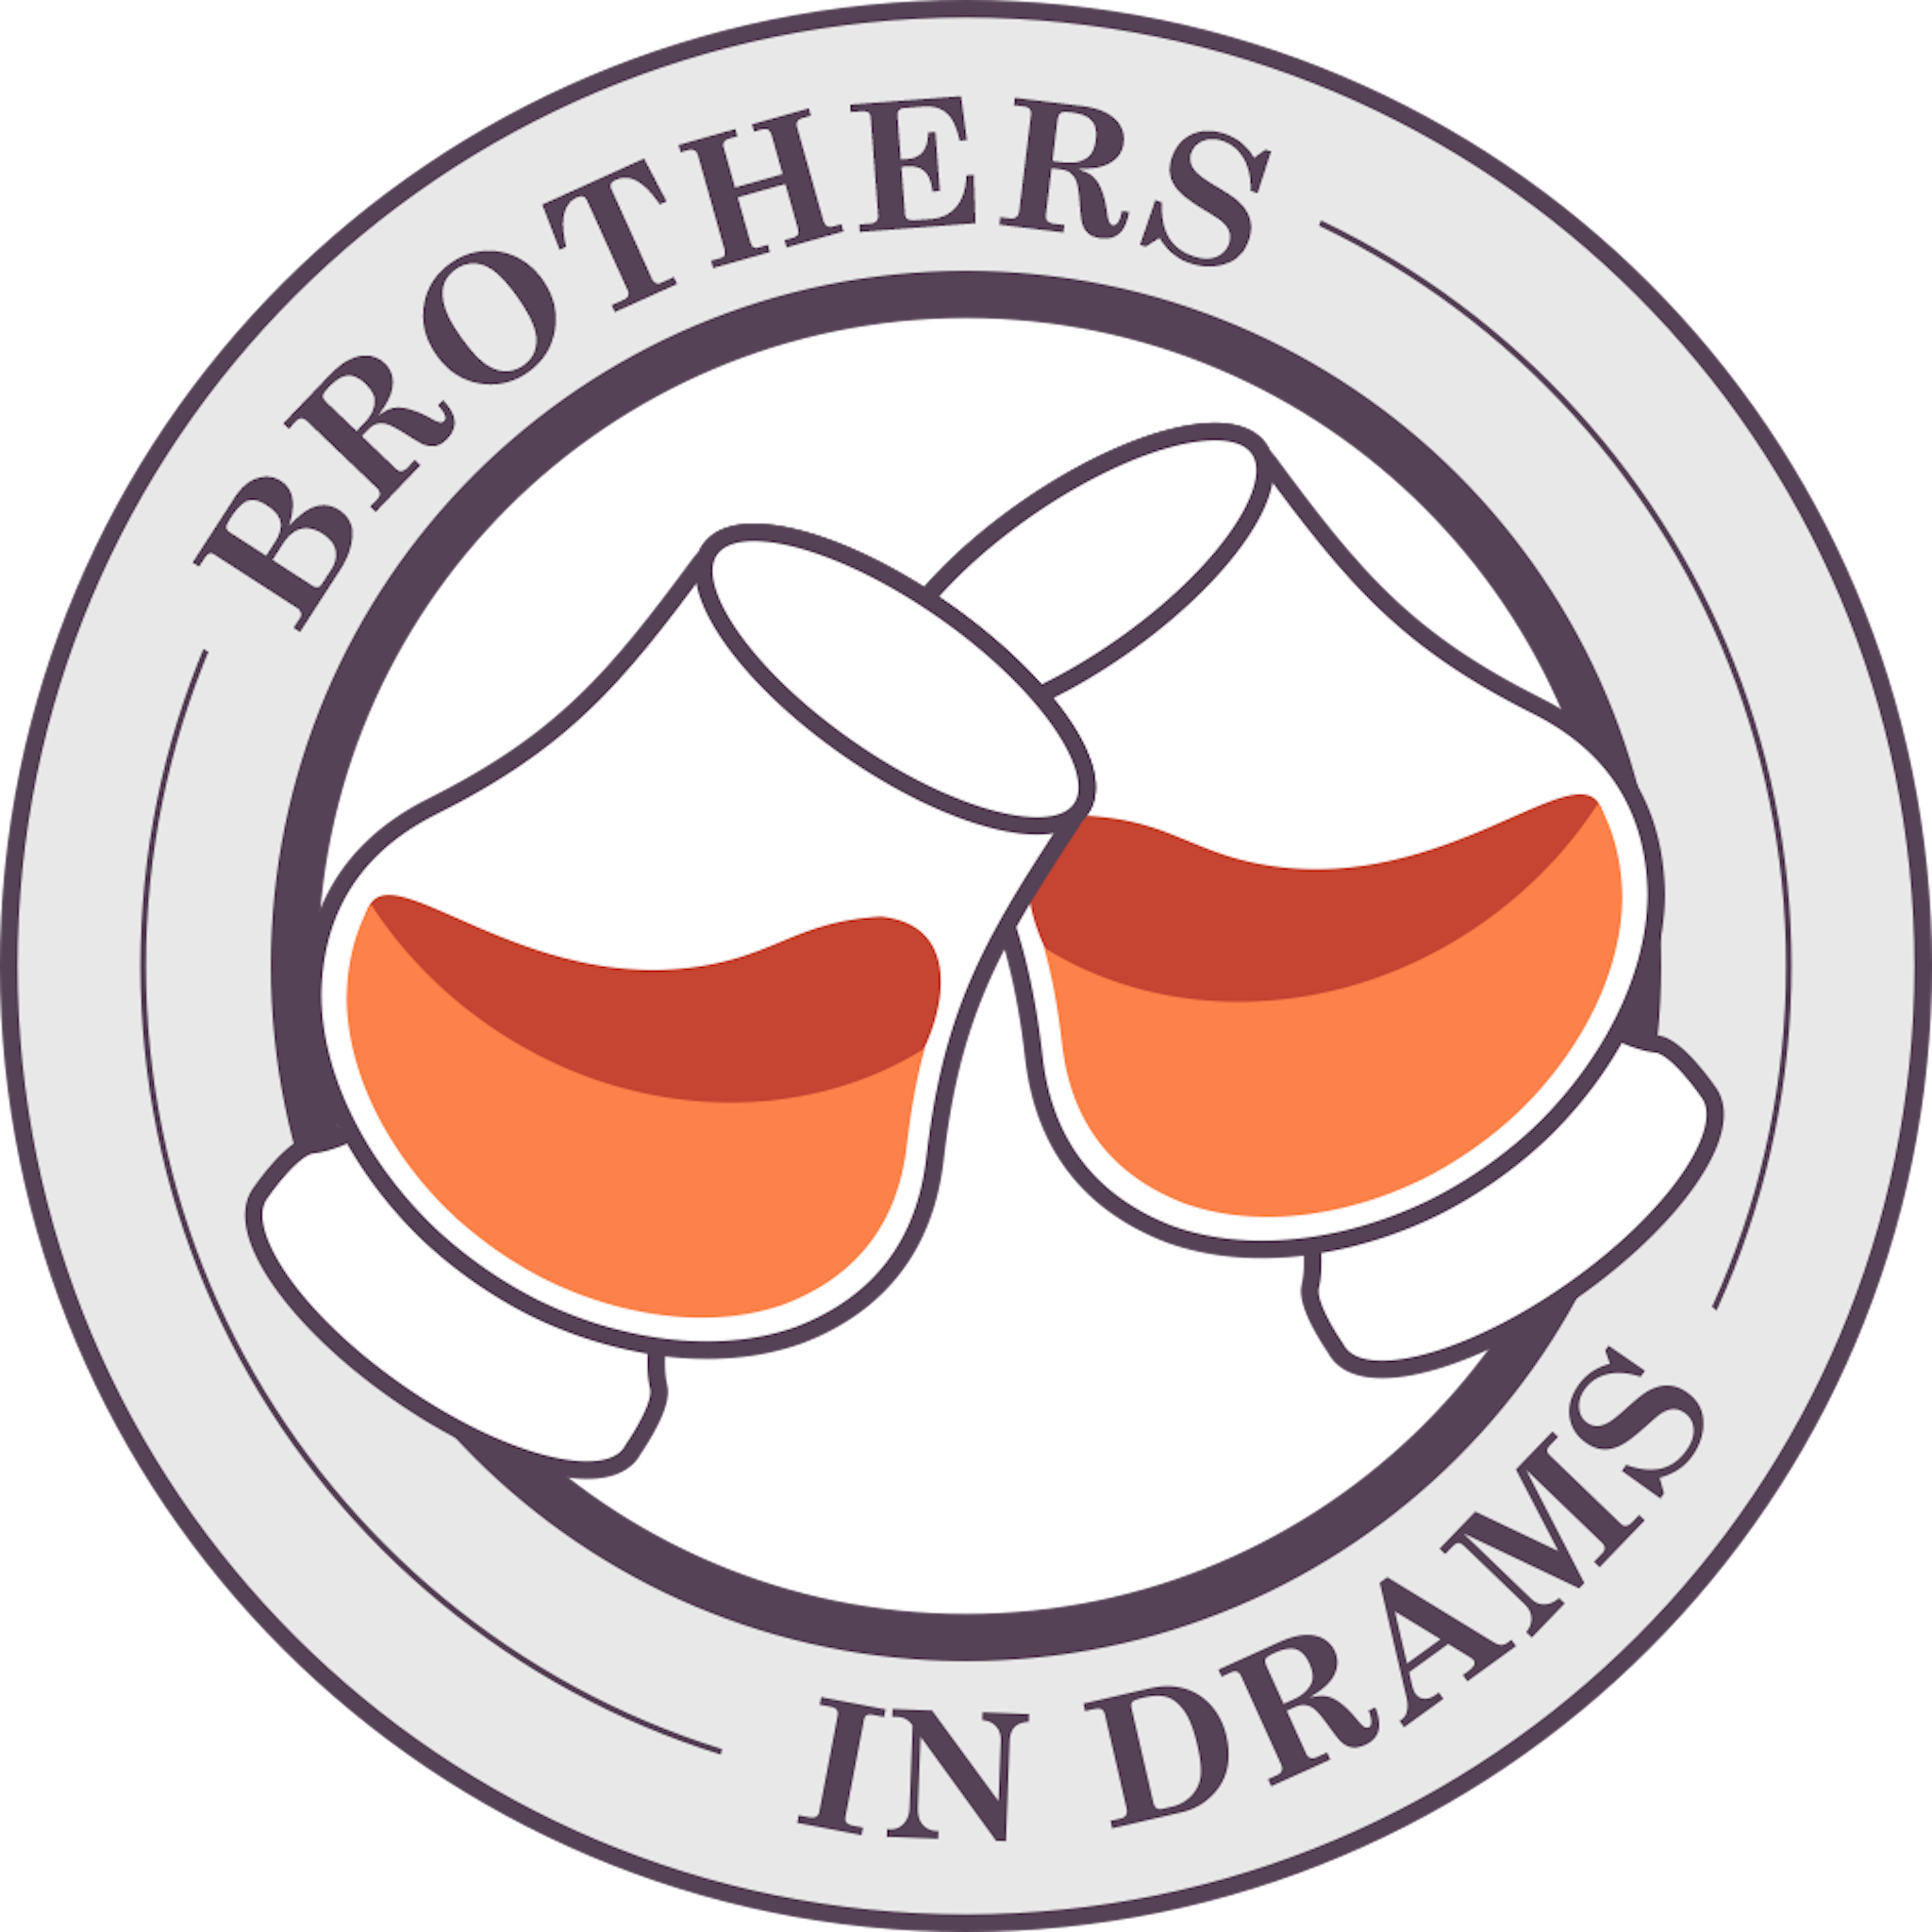 Brothers in Drams logo